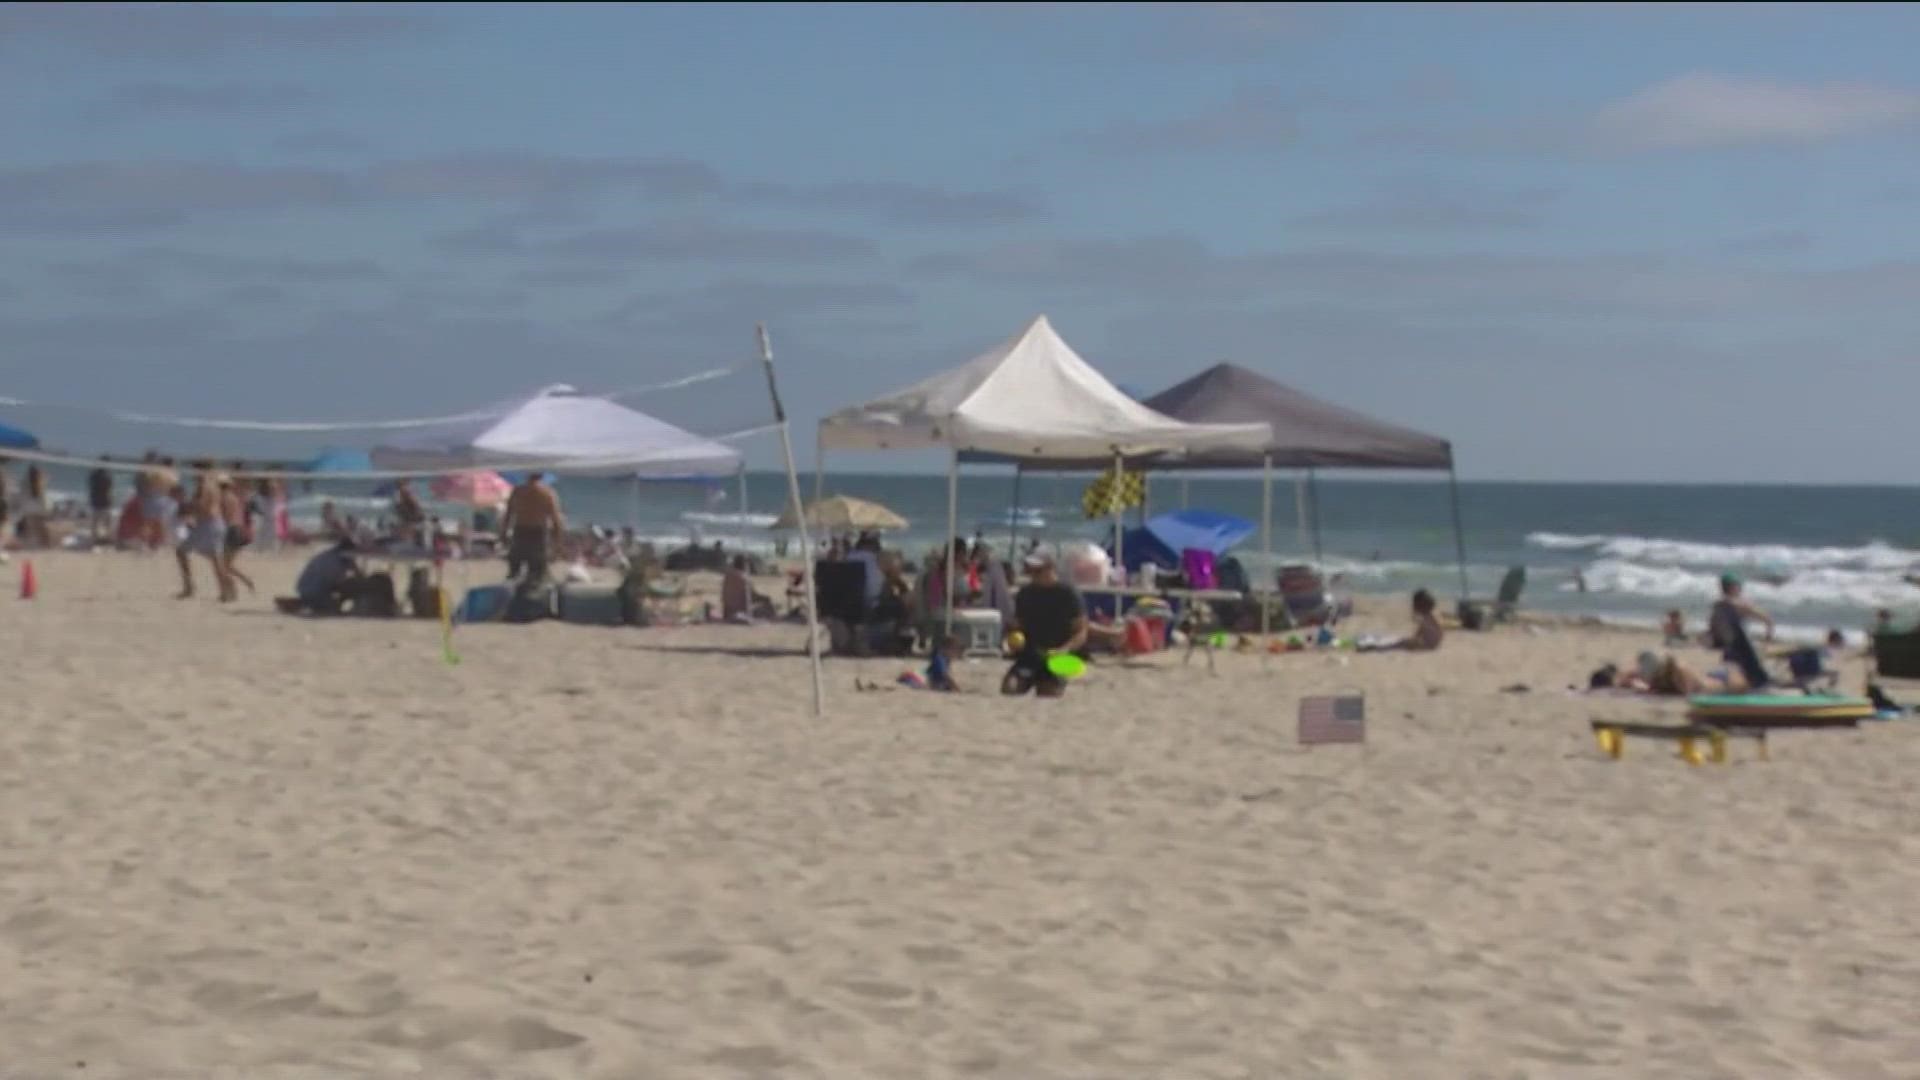 People started staking out spots in the sand bright and early Monday morning. San Diego beaches saw big crowds over the weekend.